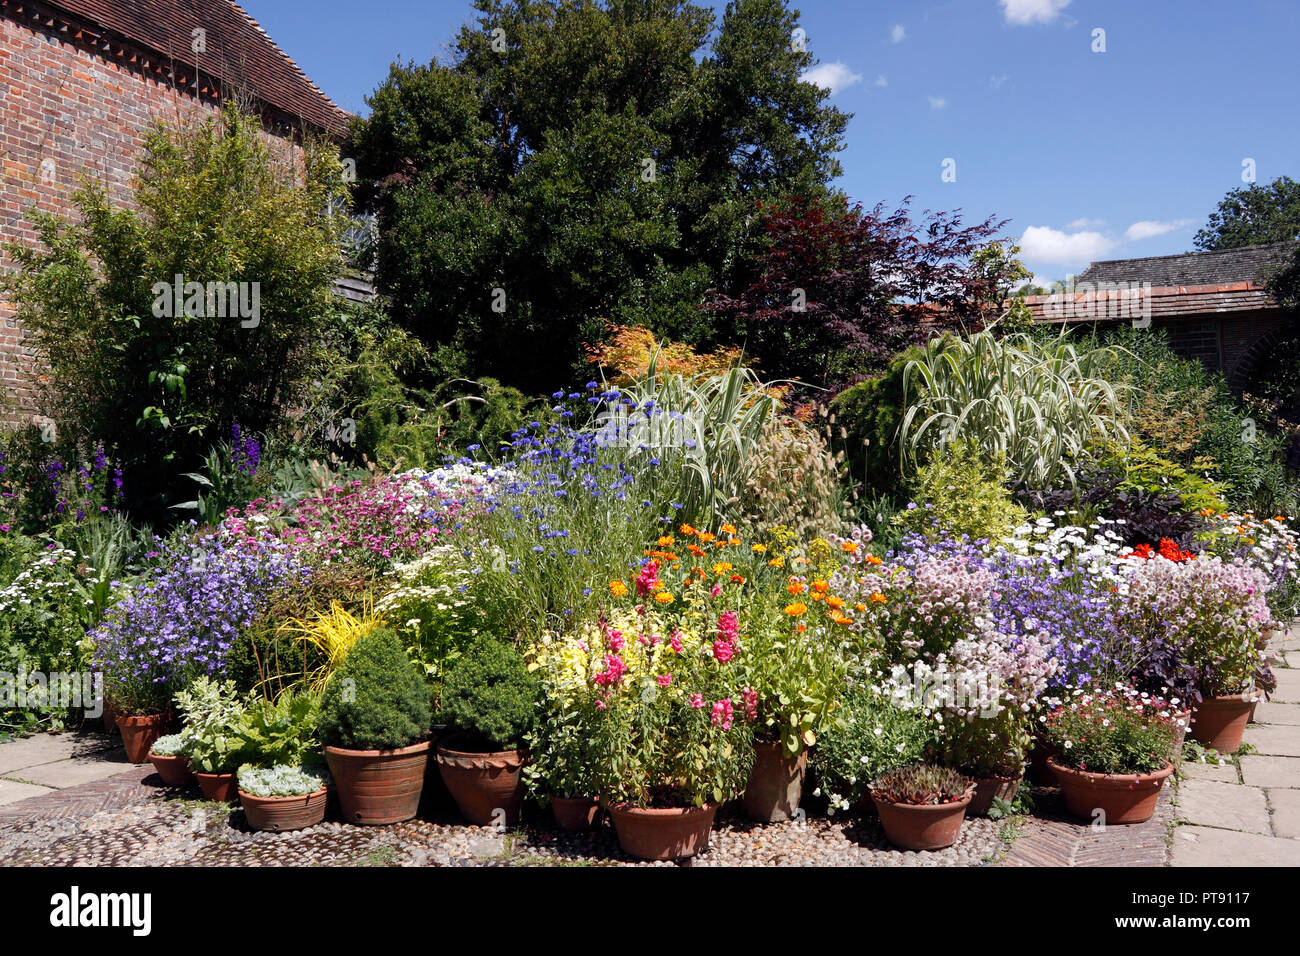 SUMMER FLOWERING GARDEN POTS AND CONTAINERS Stock Photo